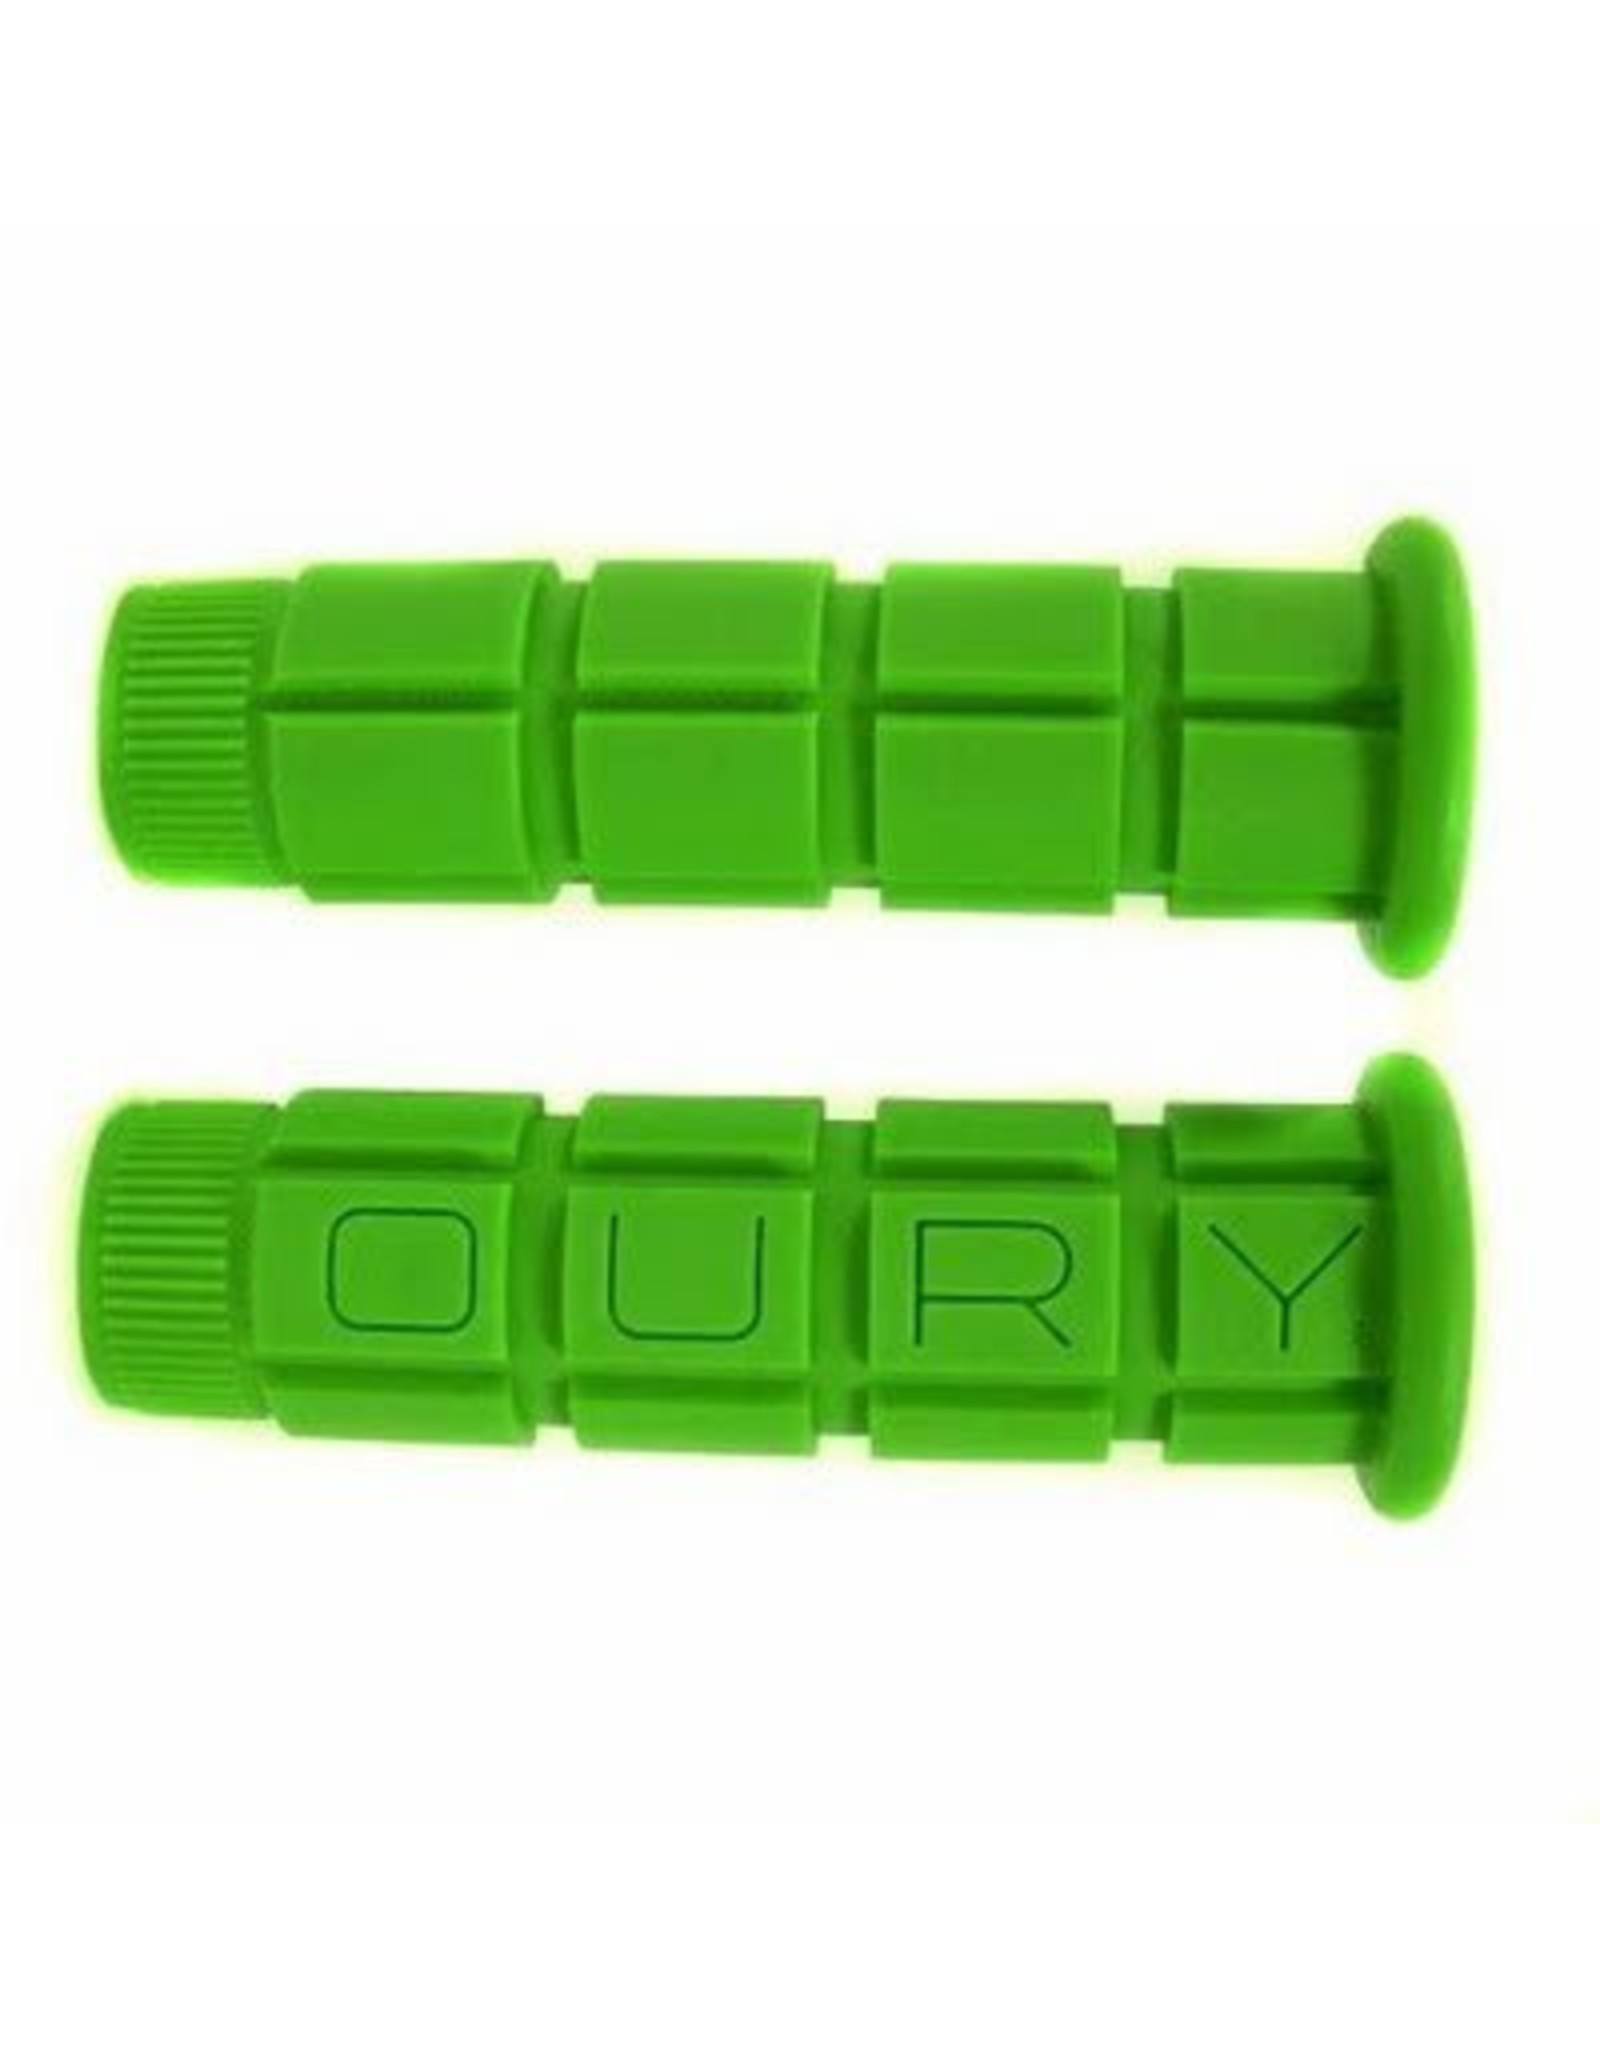 Oury Grips Oury Grips